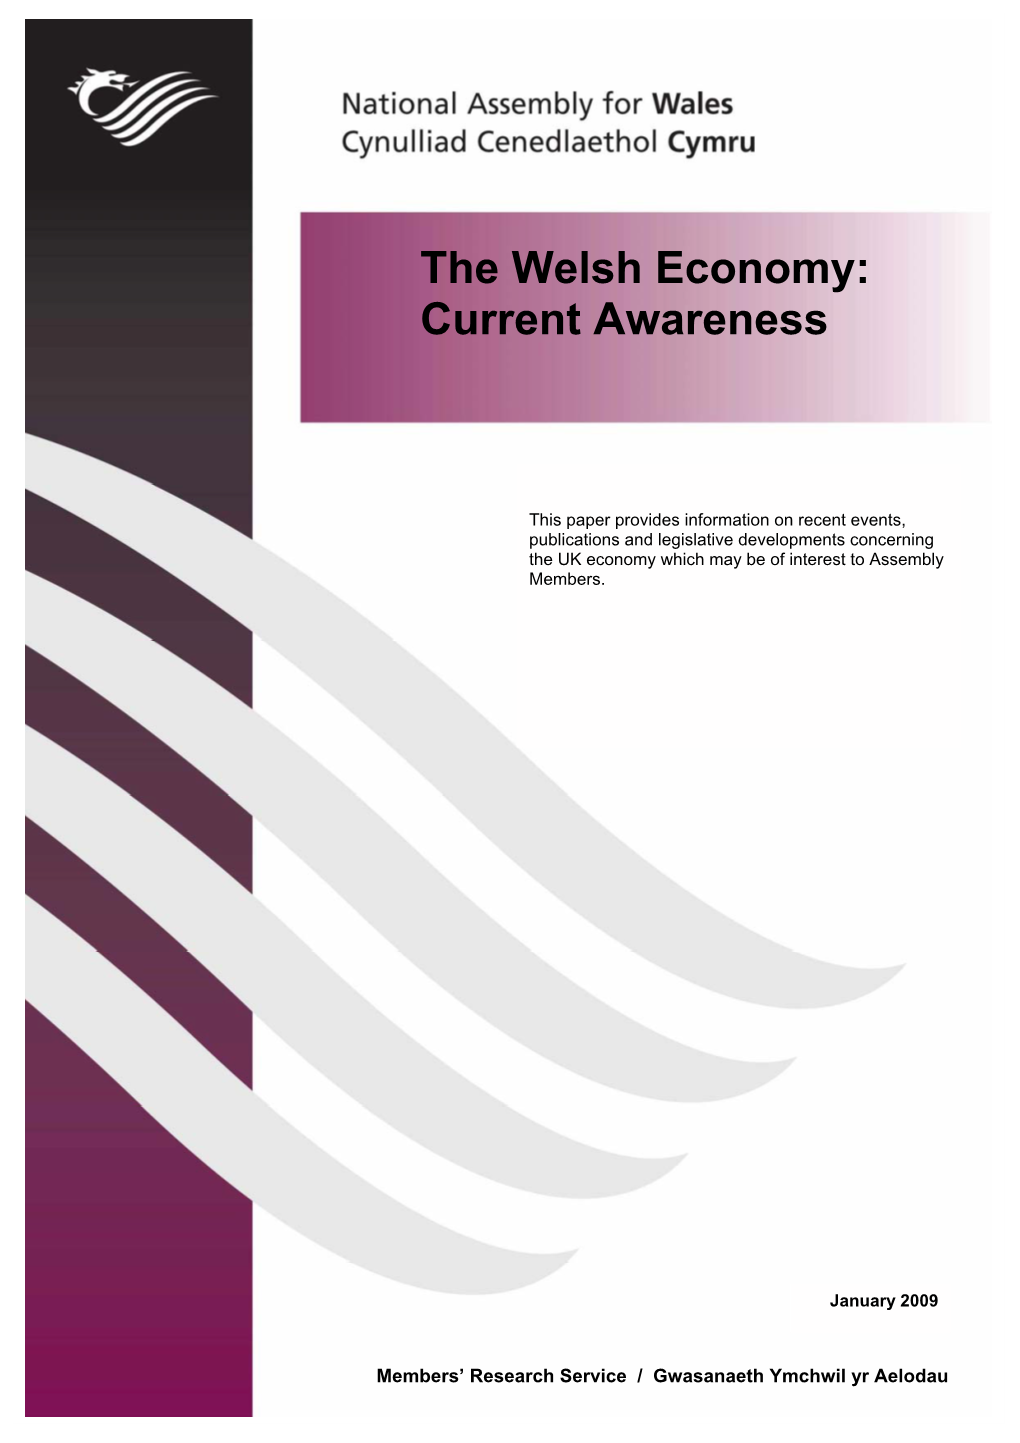 The Welsh Economy: Current Awareness